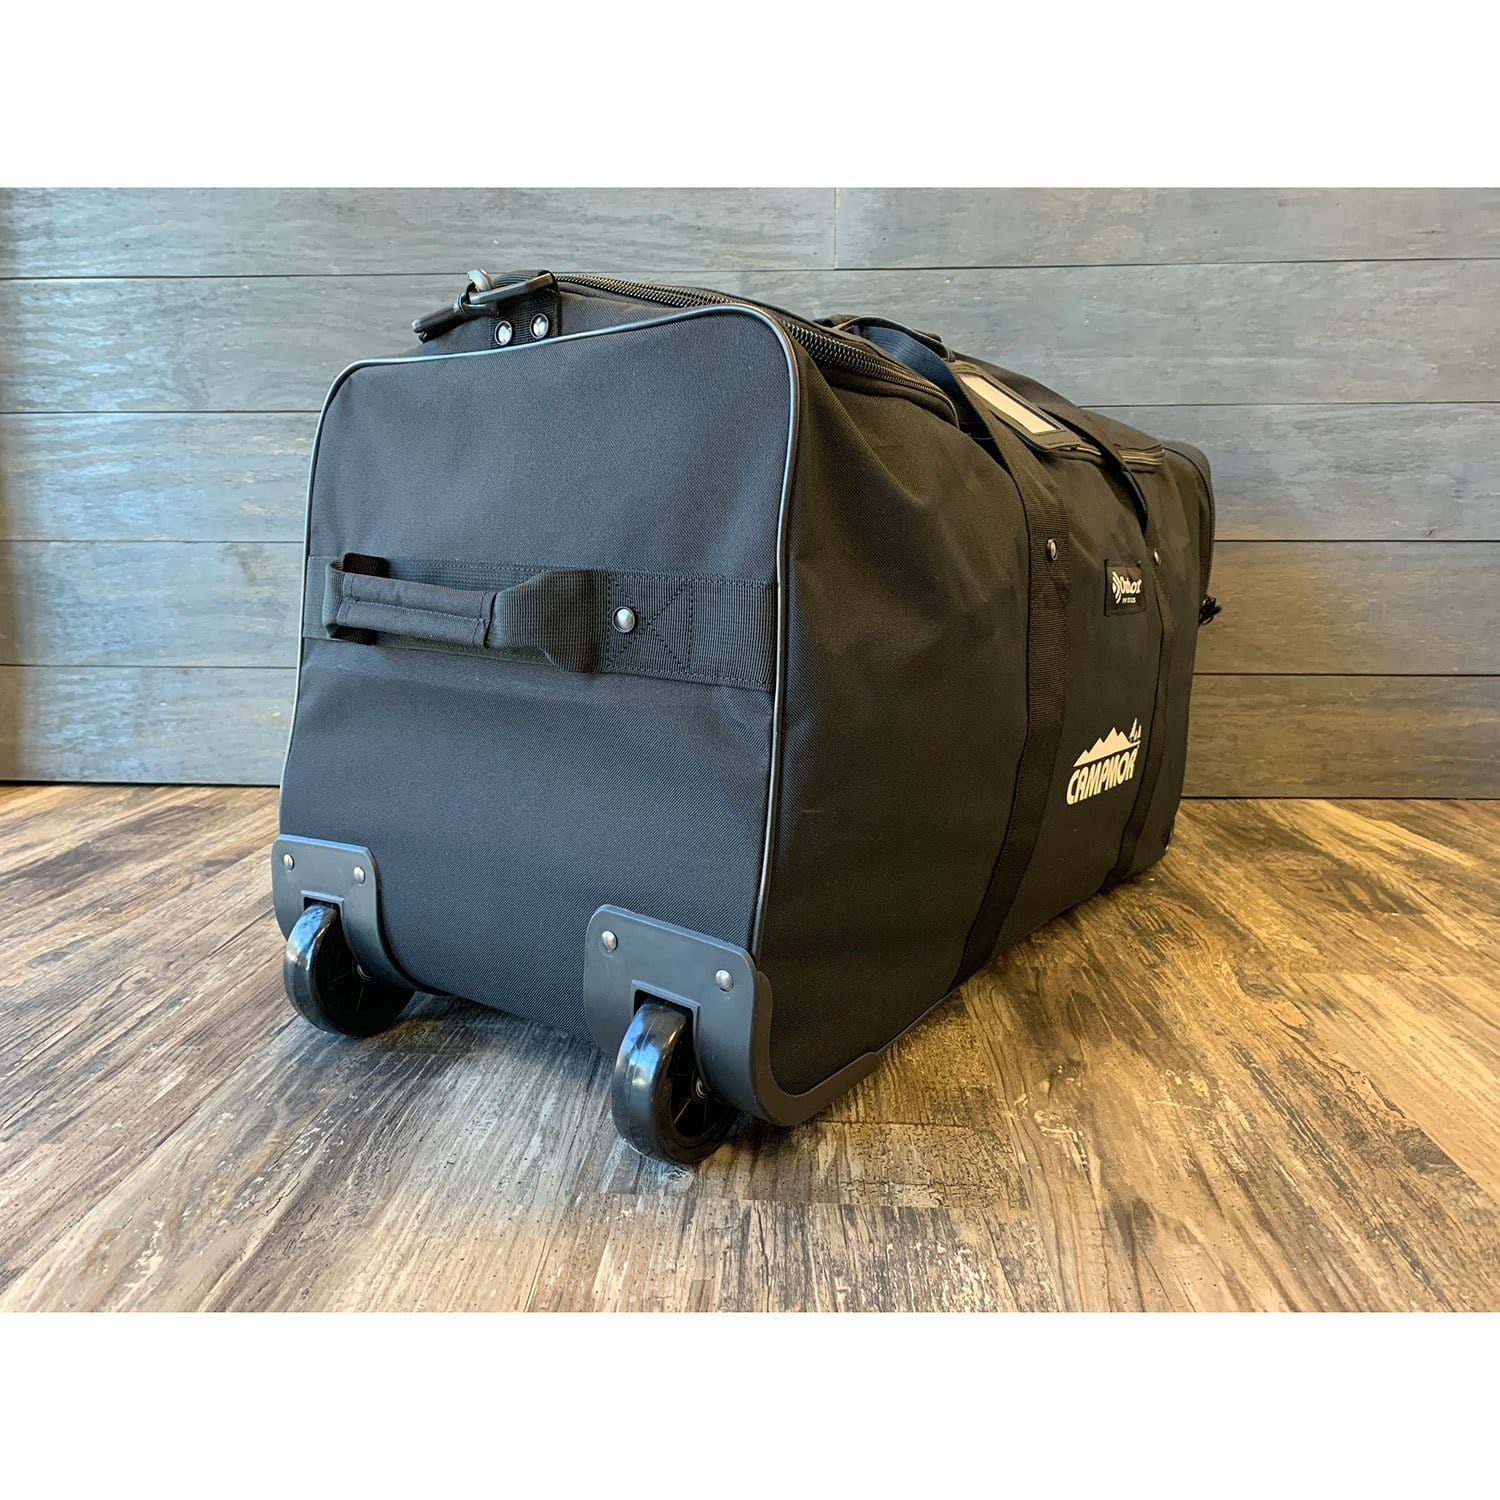 Shop Travel & Luggage, Duffles, Carry-On, & More